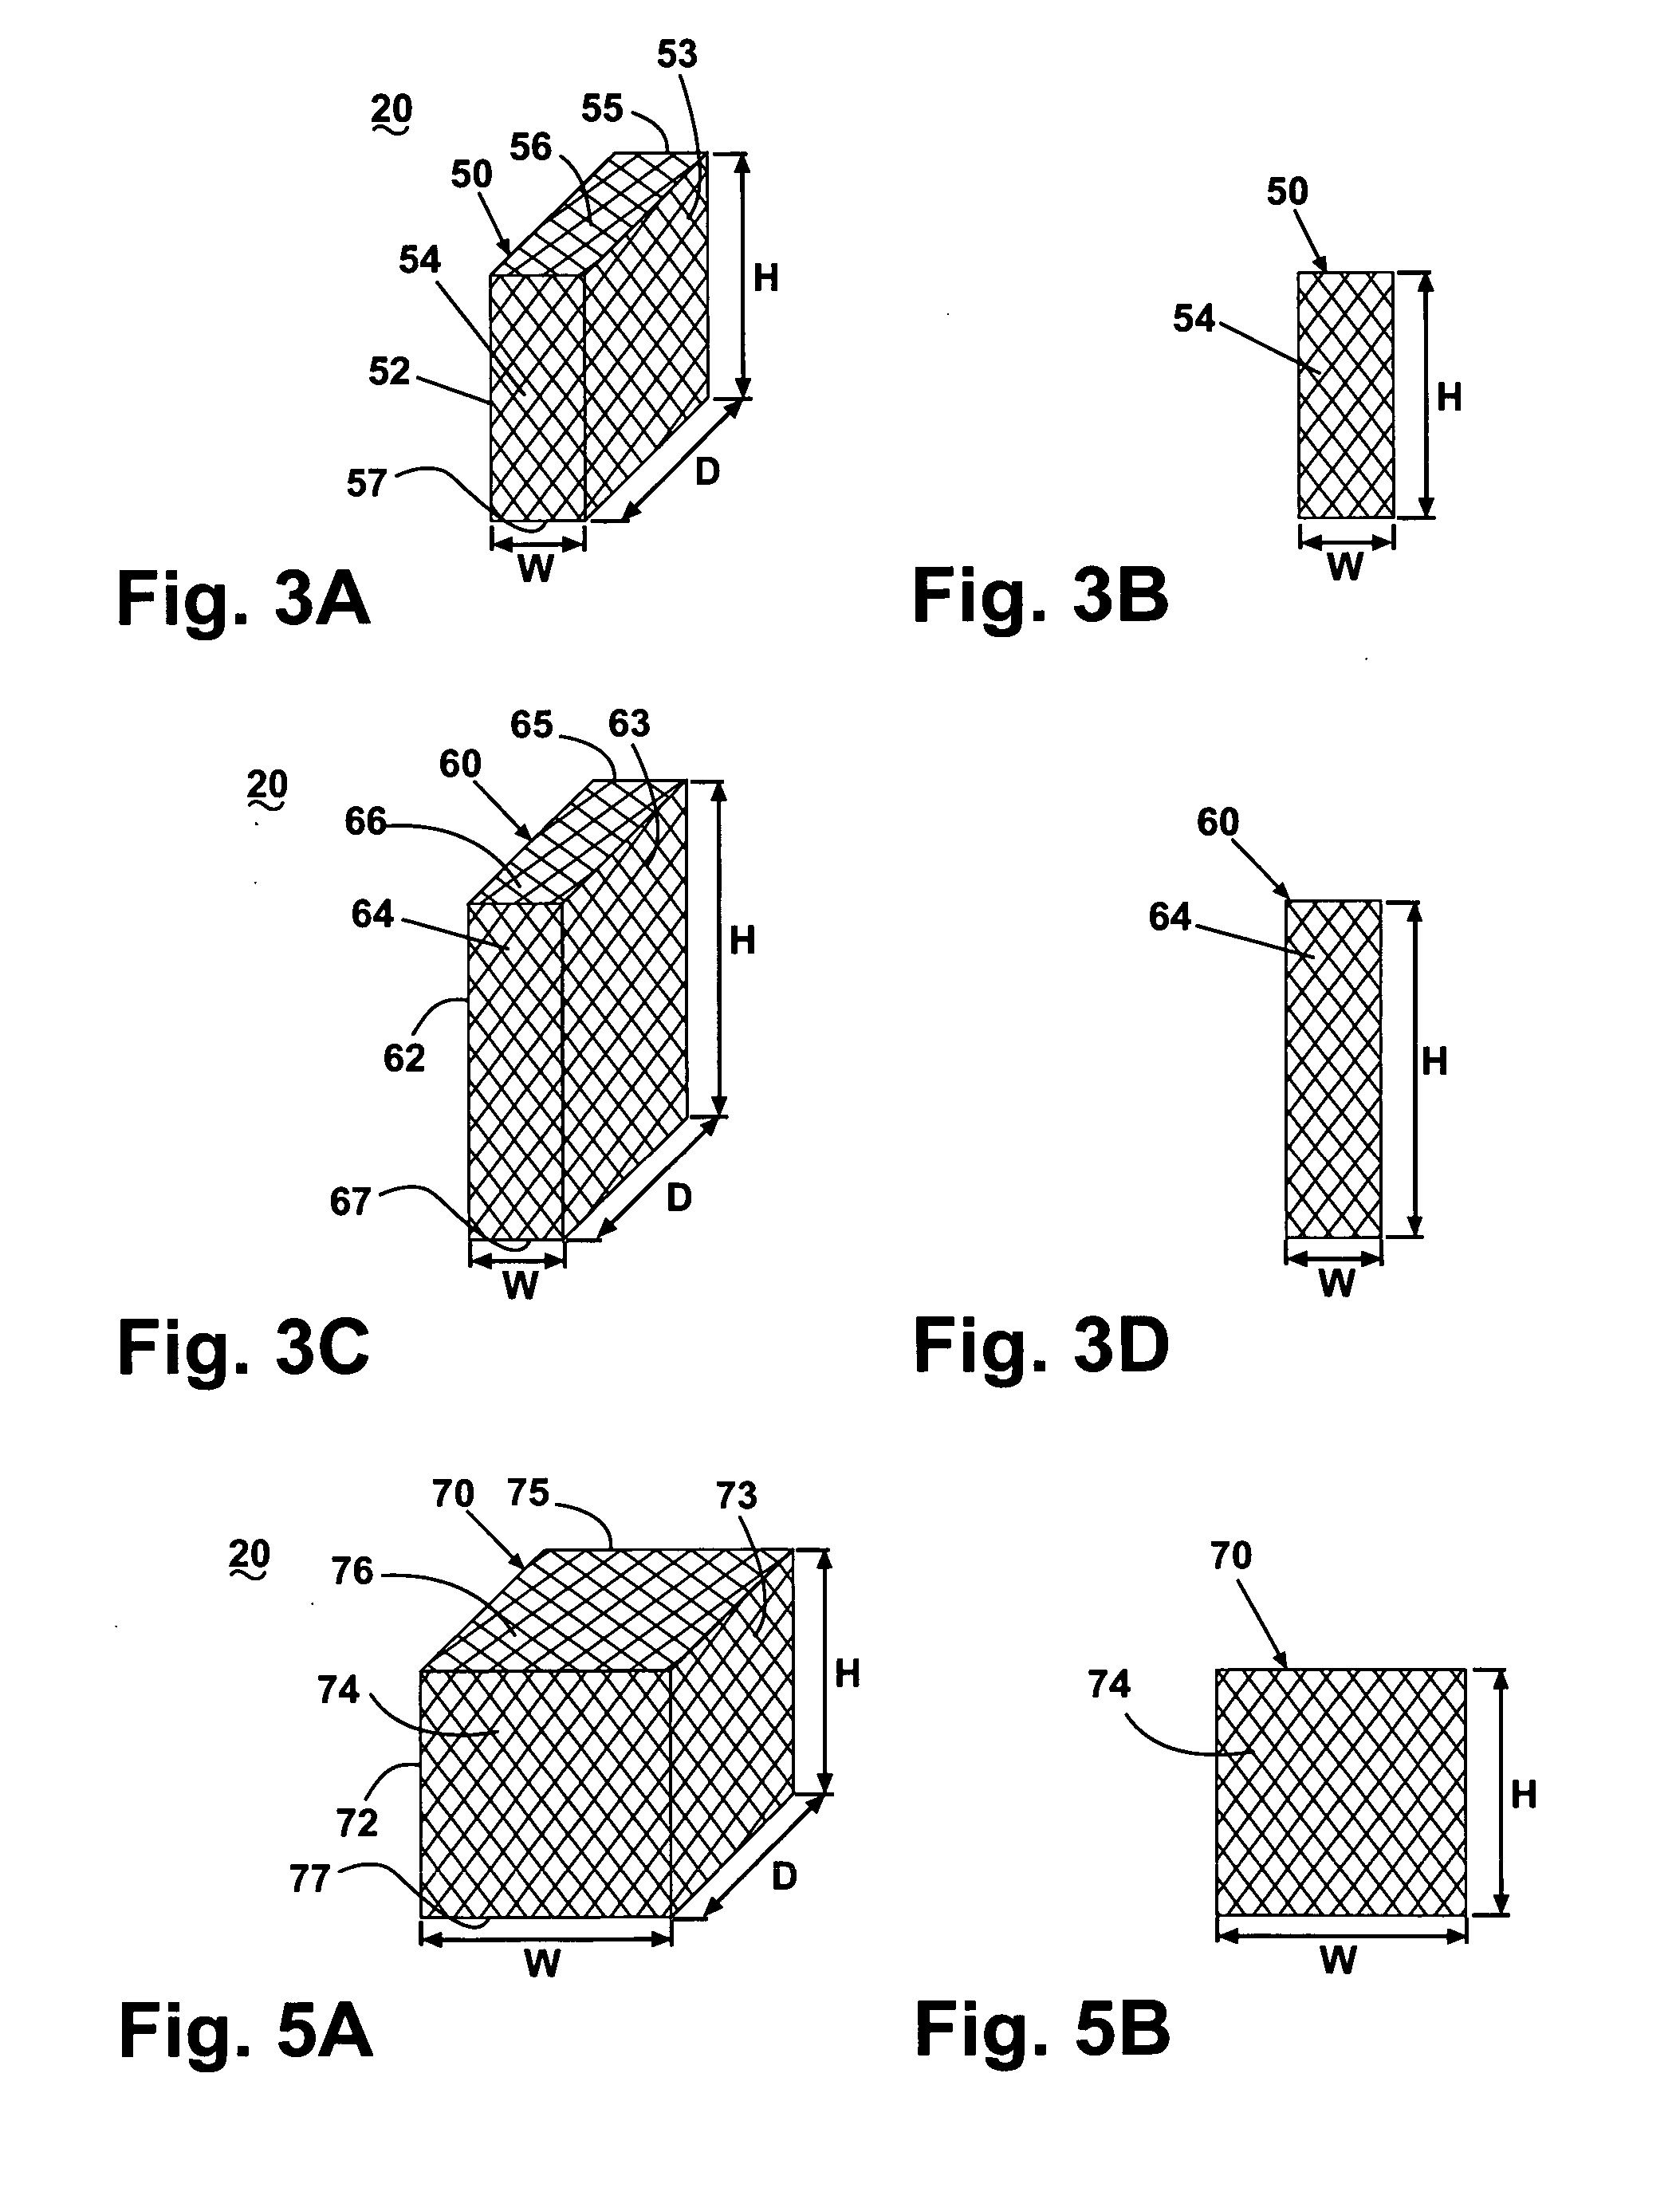 Modular laundry system with horizontal module spanning two laundry appliances